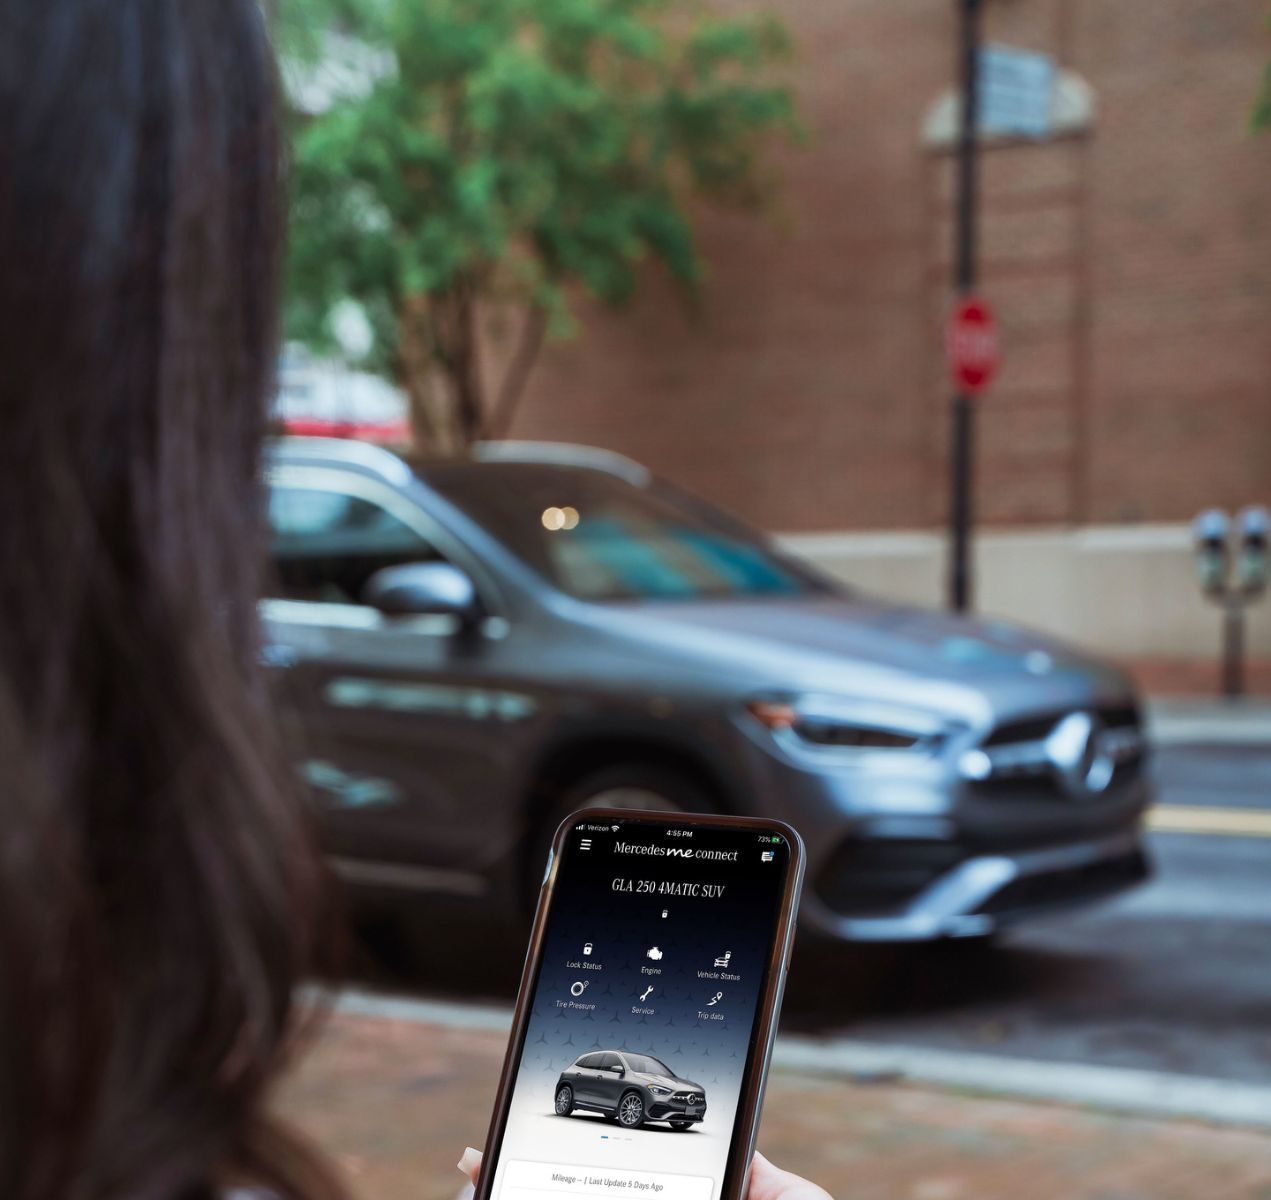 A look at what you can do with the Mercedes me app